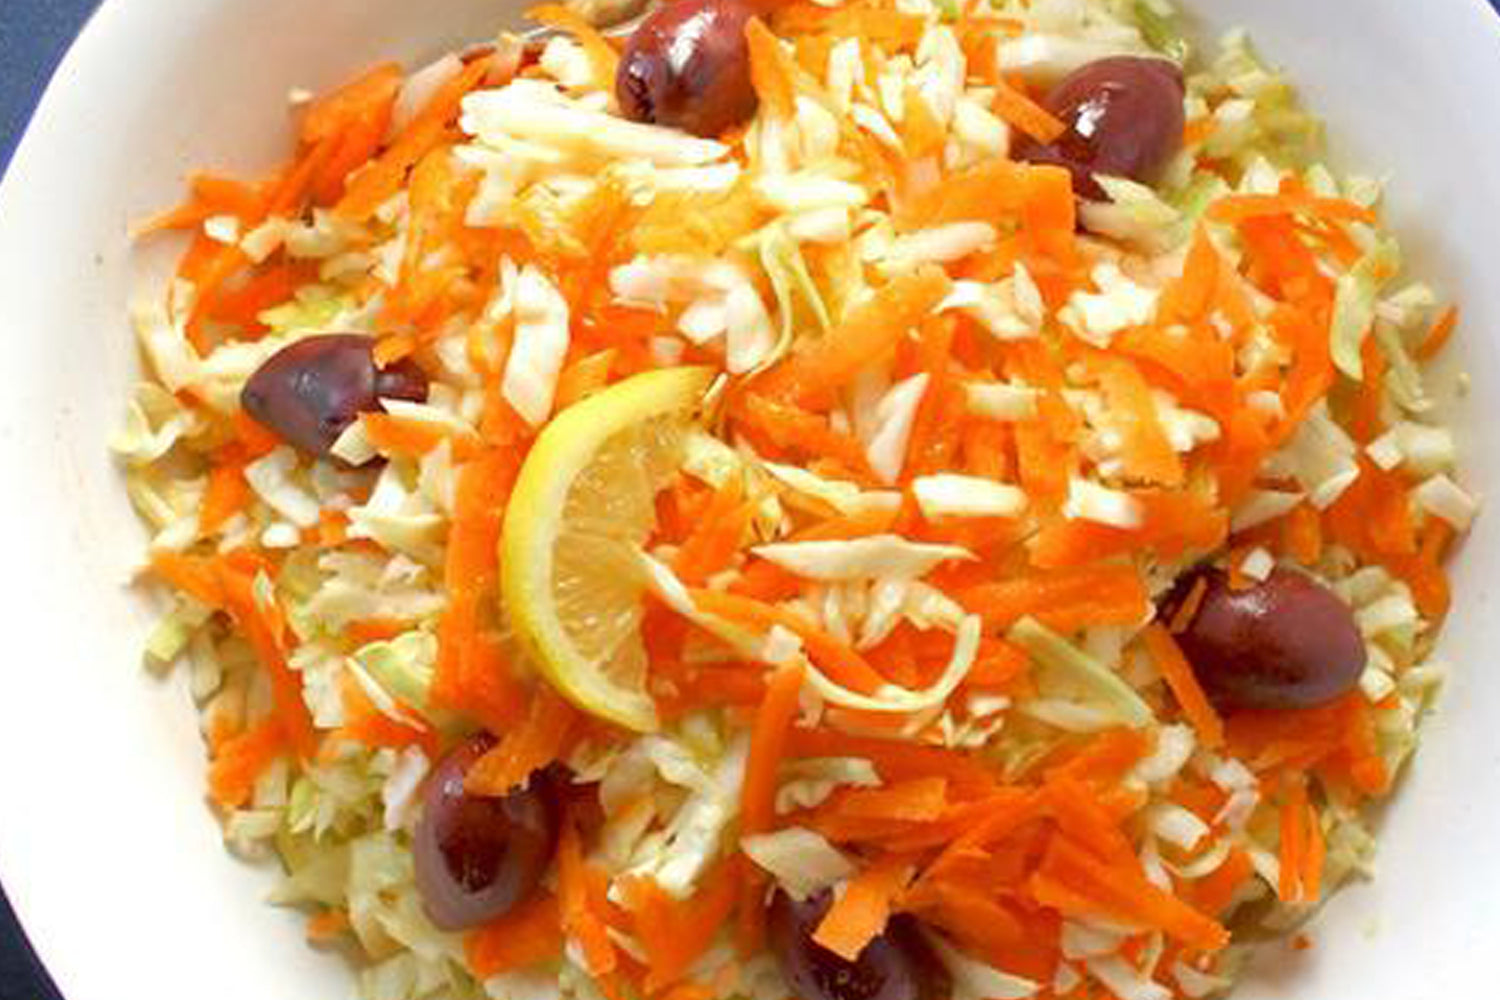 Carrot and Cabbage Winter Salad